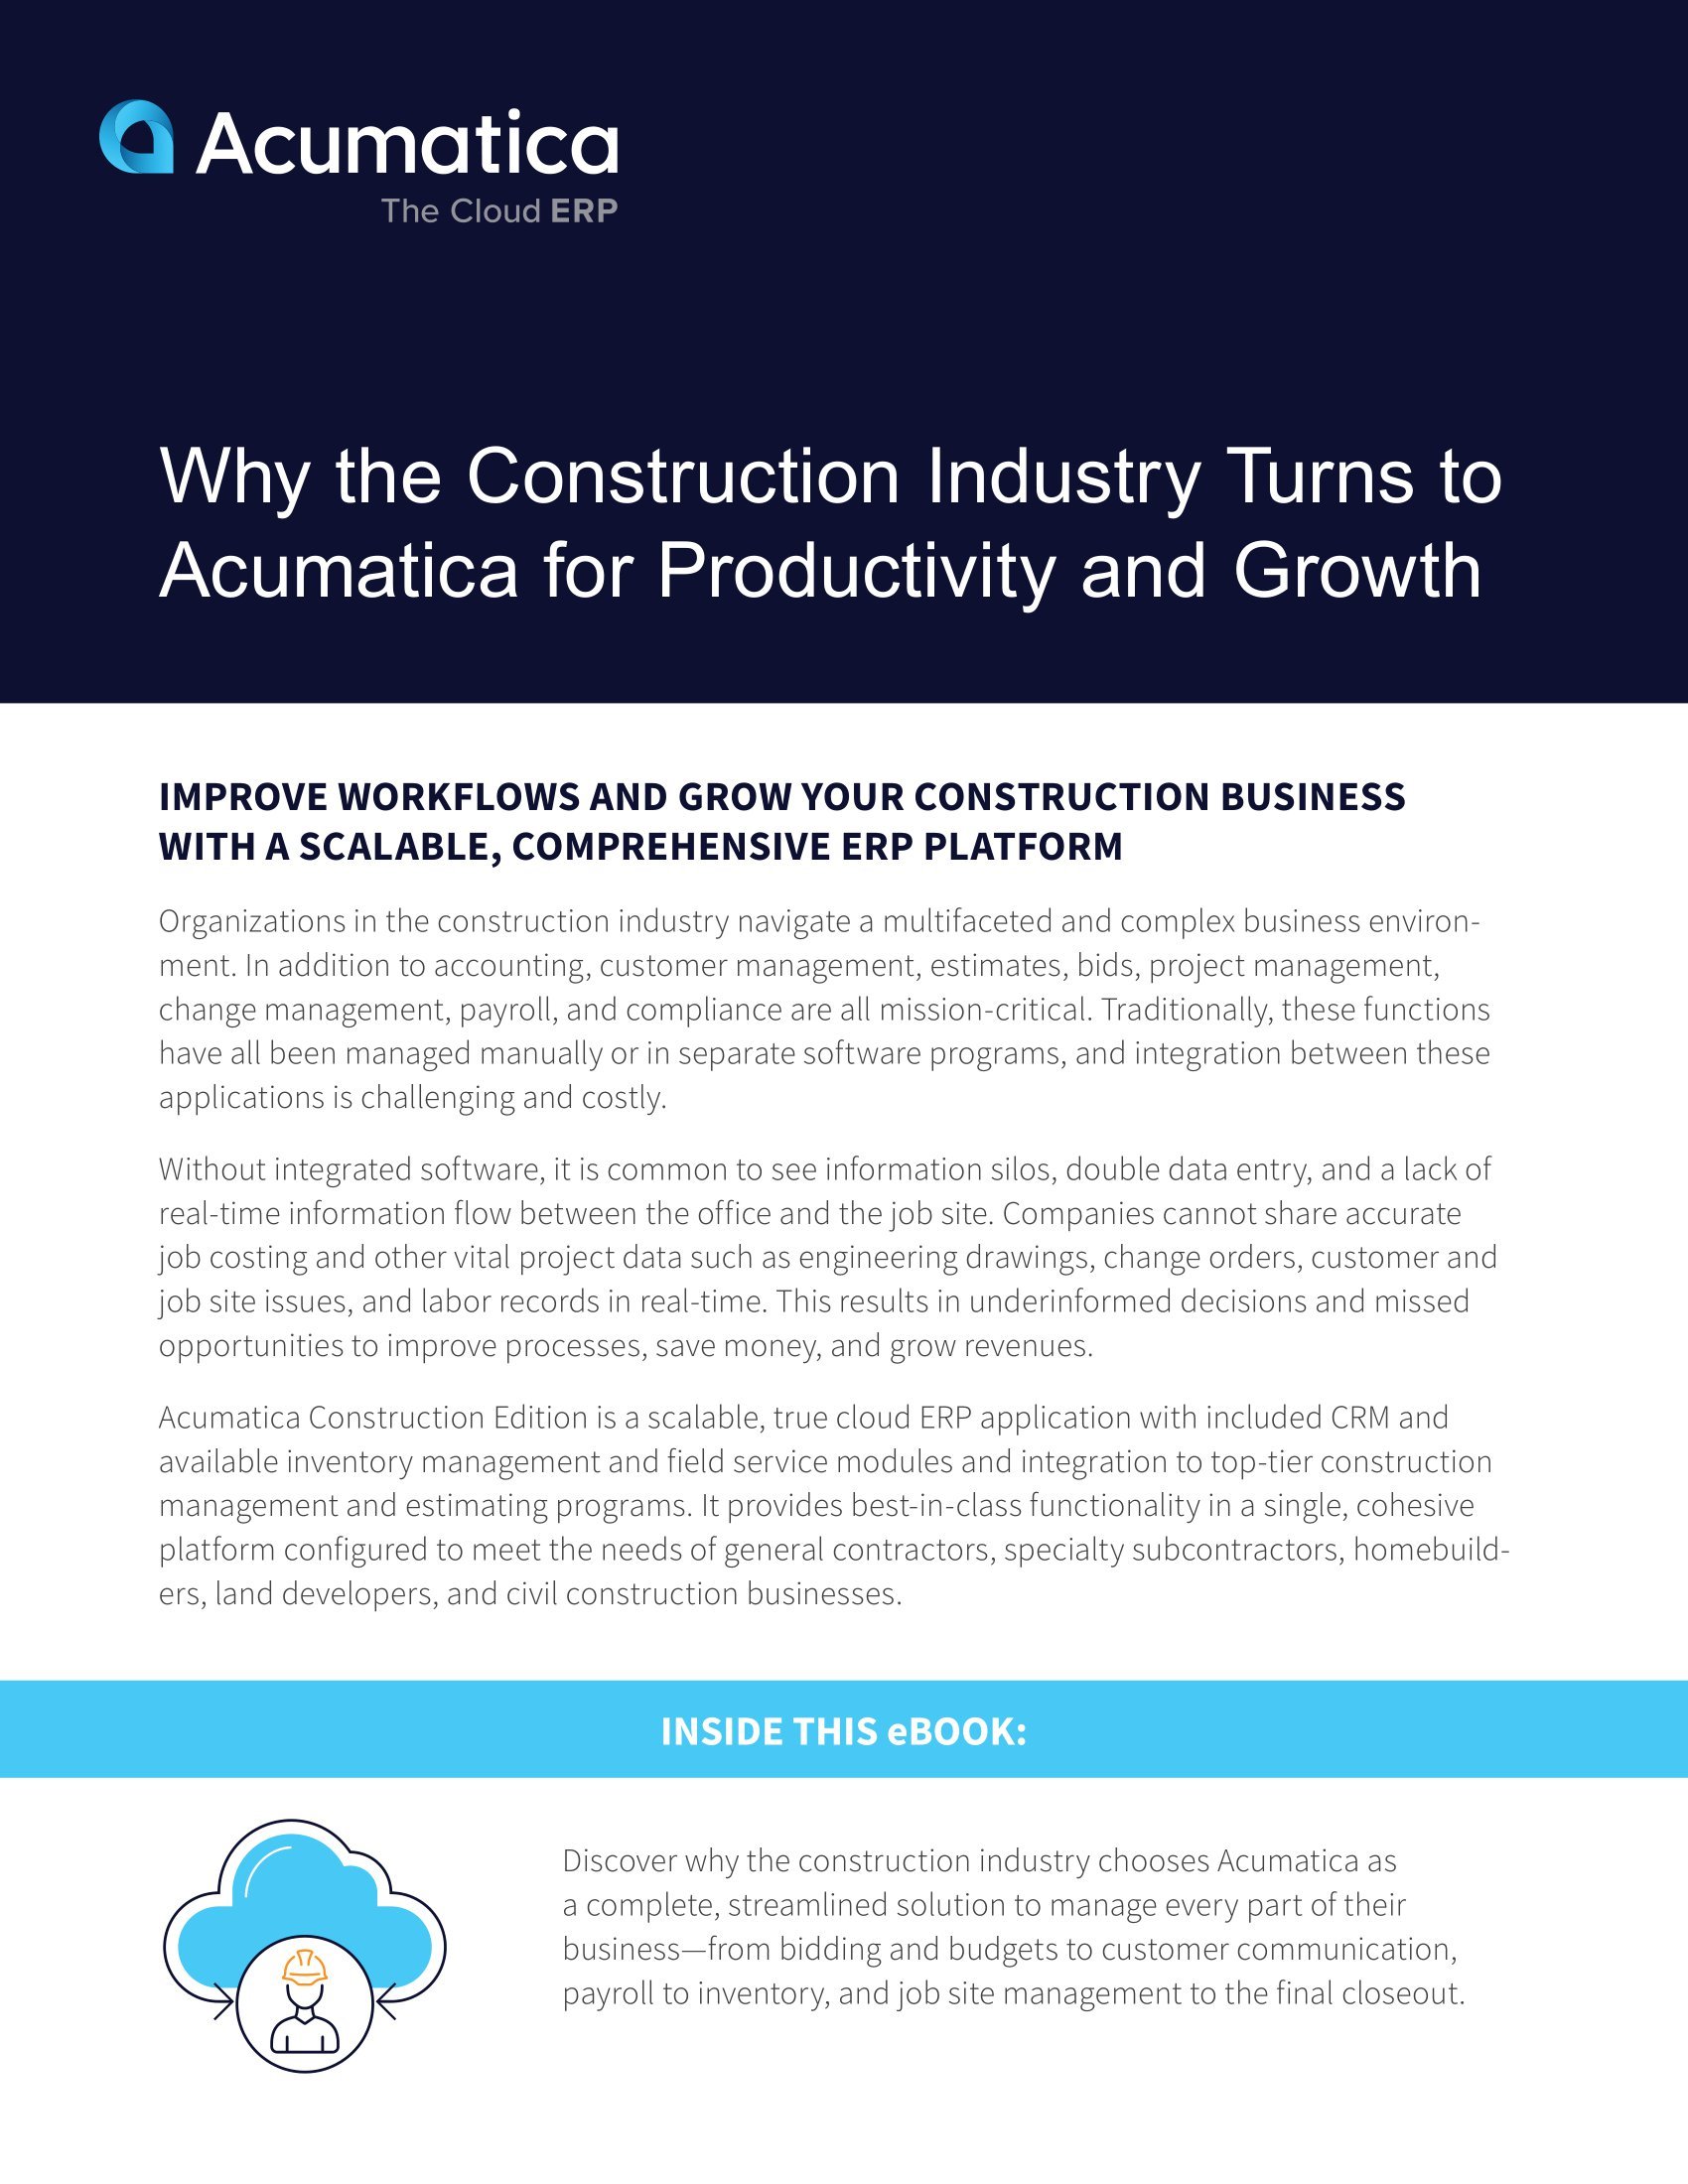 Discover the Complete ERP for the Construction Industry